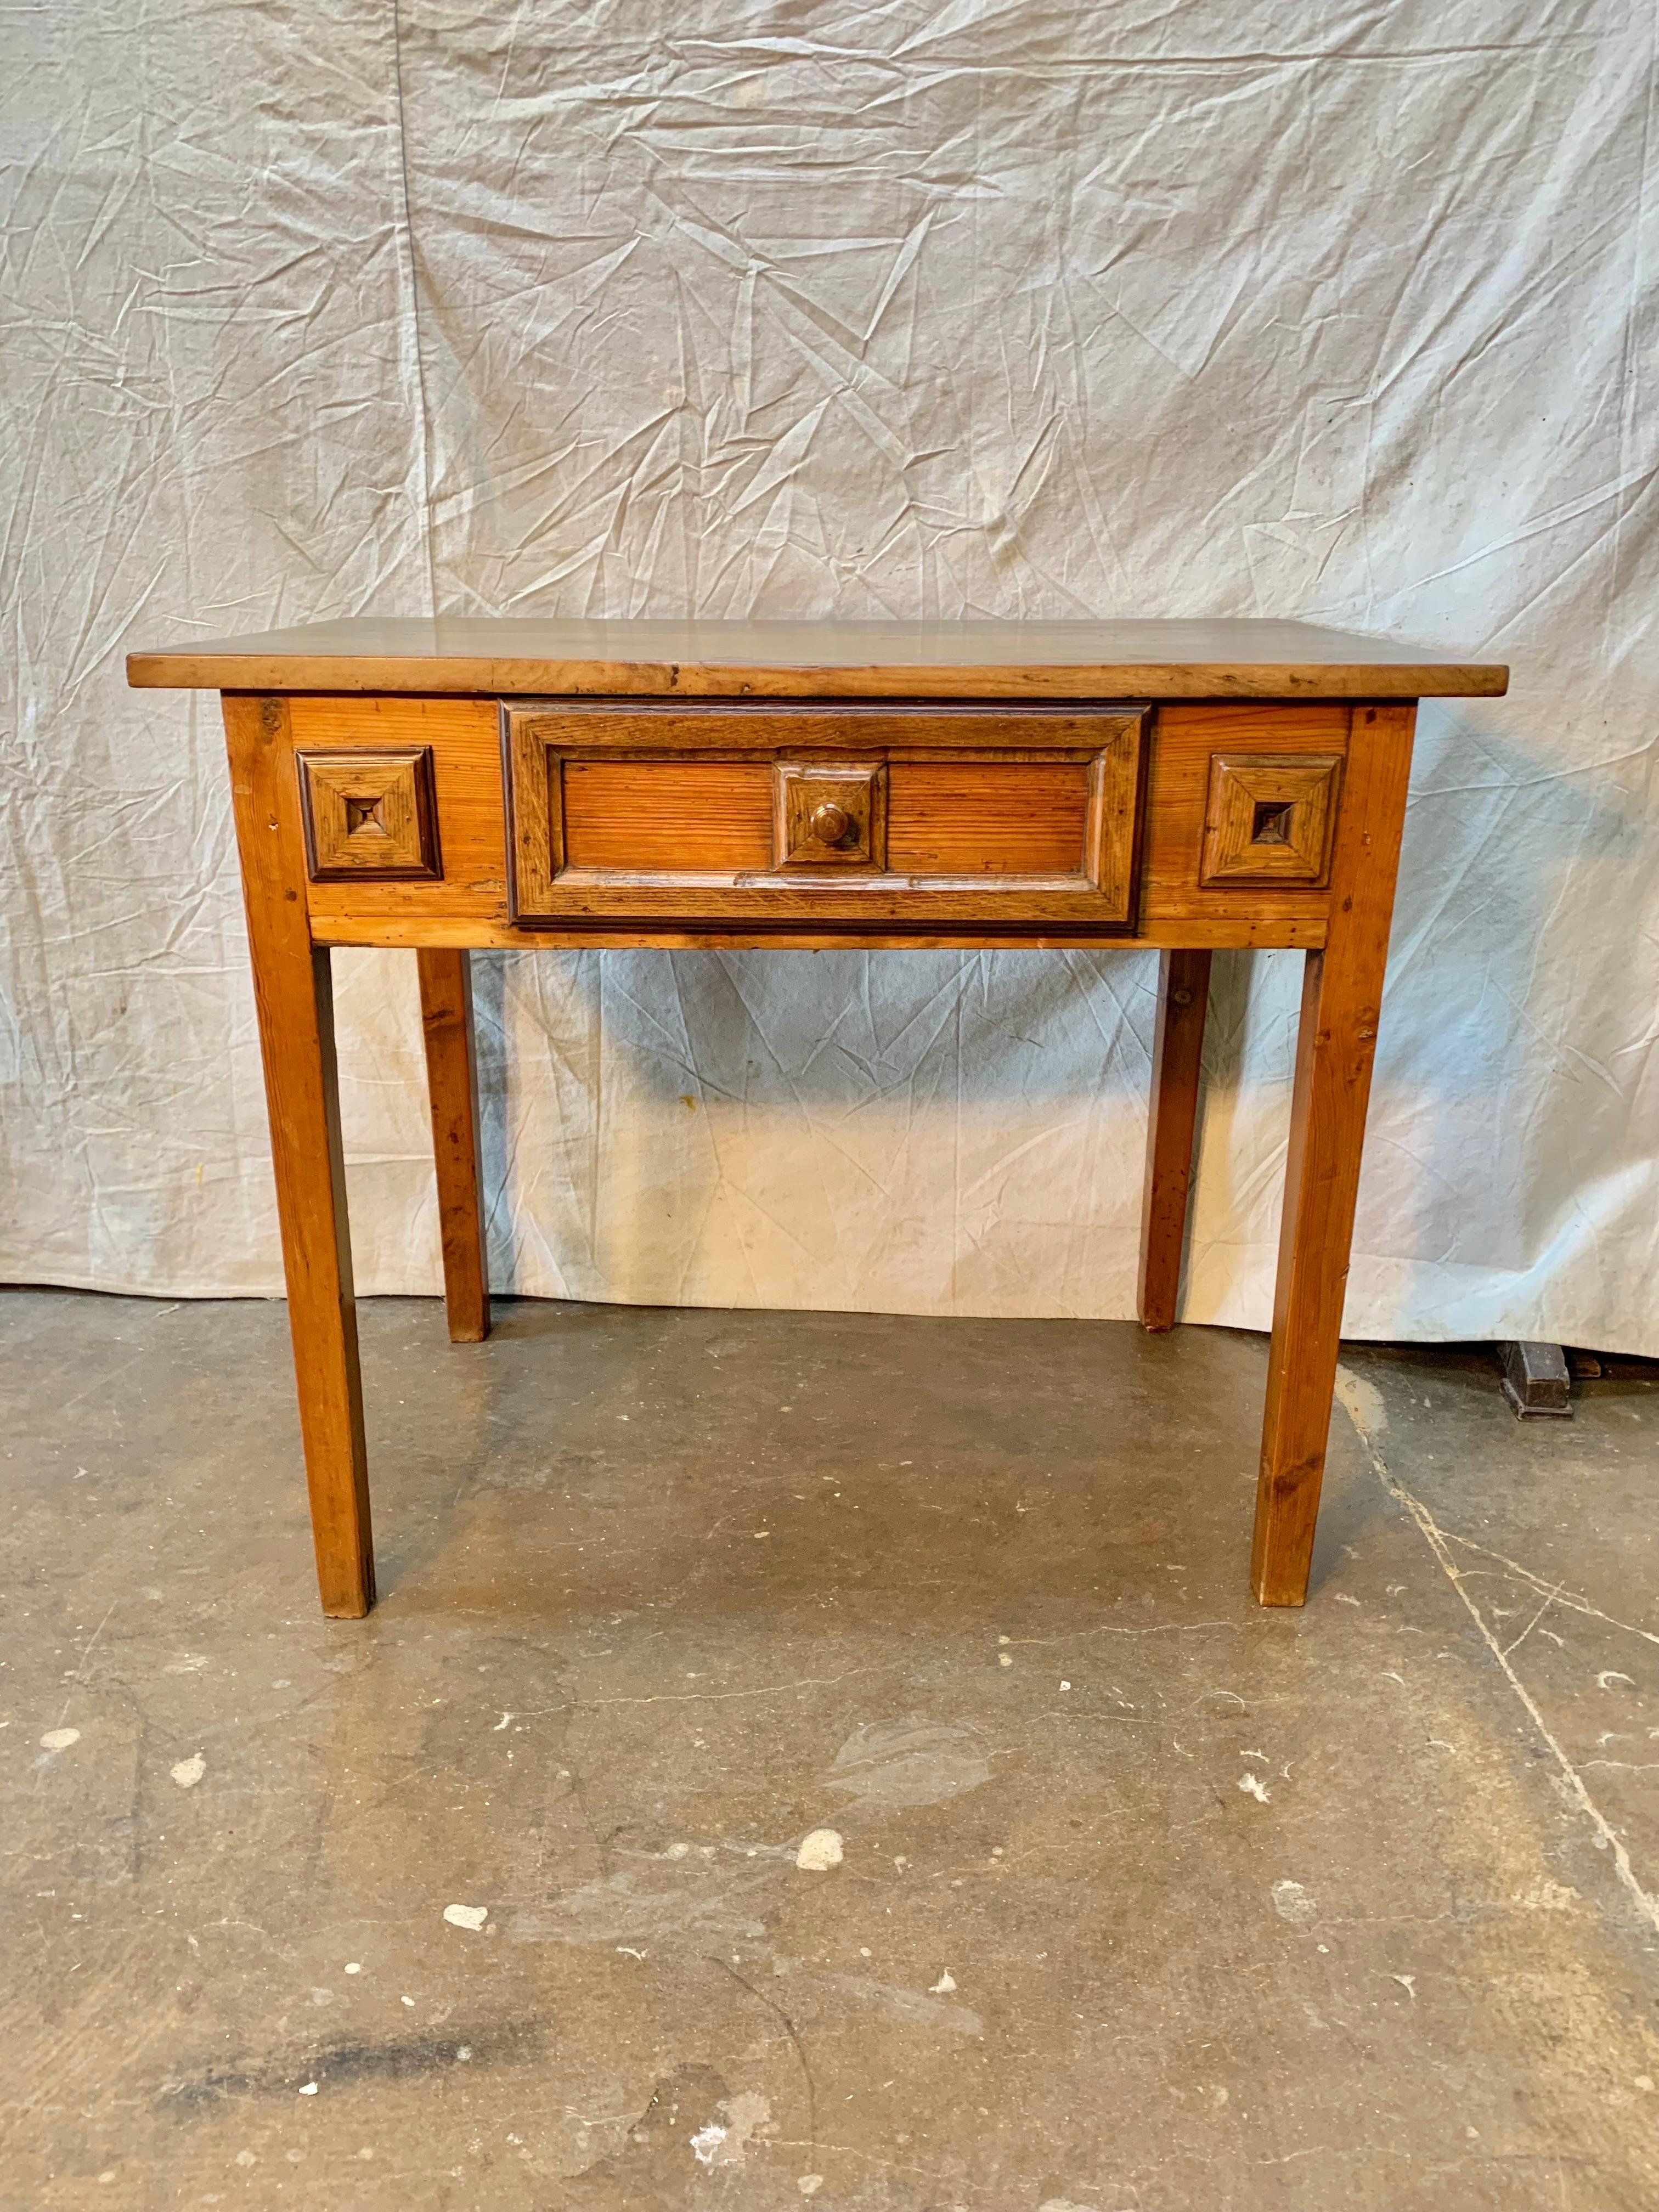 Found in Spain this 19th Century Spanish Walnut One Drawer Side Table features a rectangular top sitting above a single dovetailed drawer adorned with a wood pull which rests above four sturdy legs. The drawer and table facade are adorned with hand